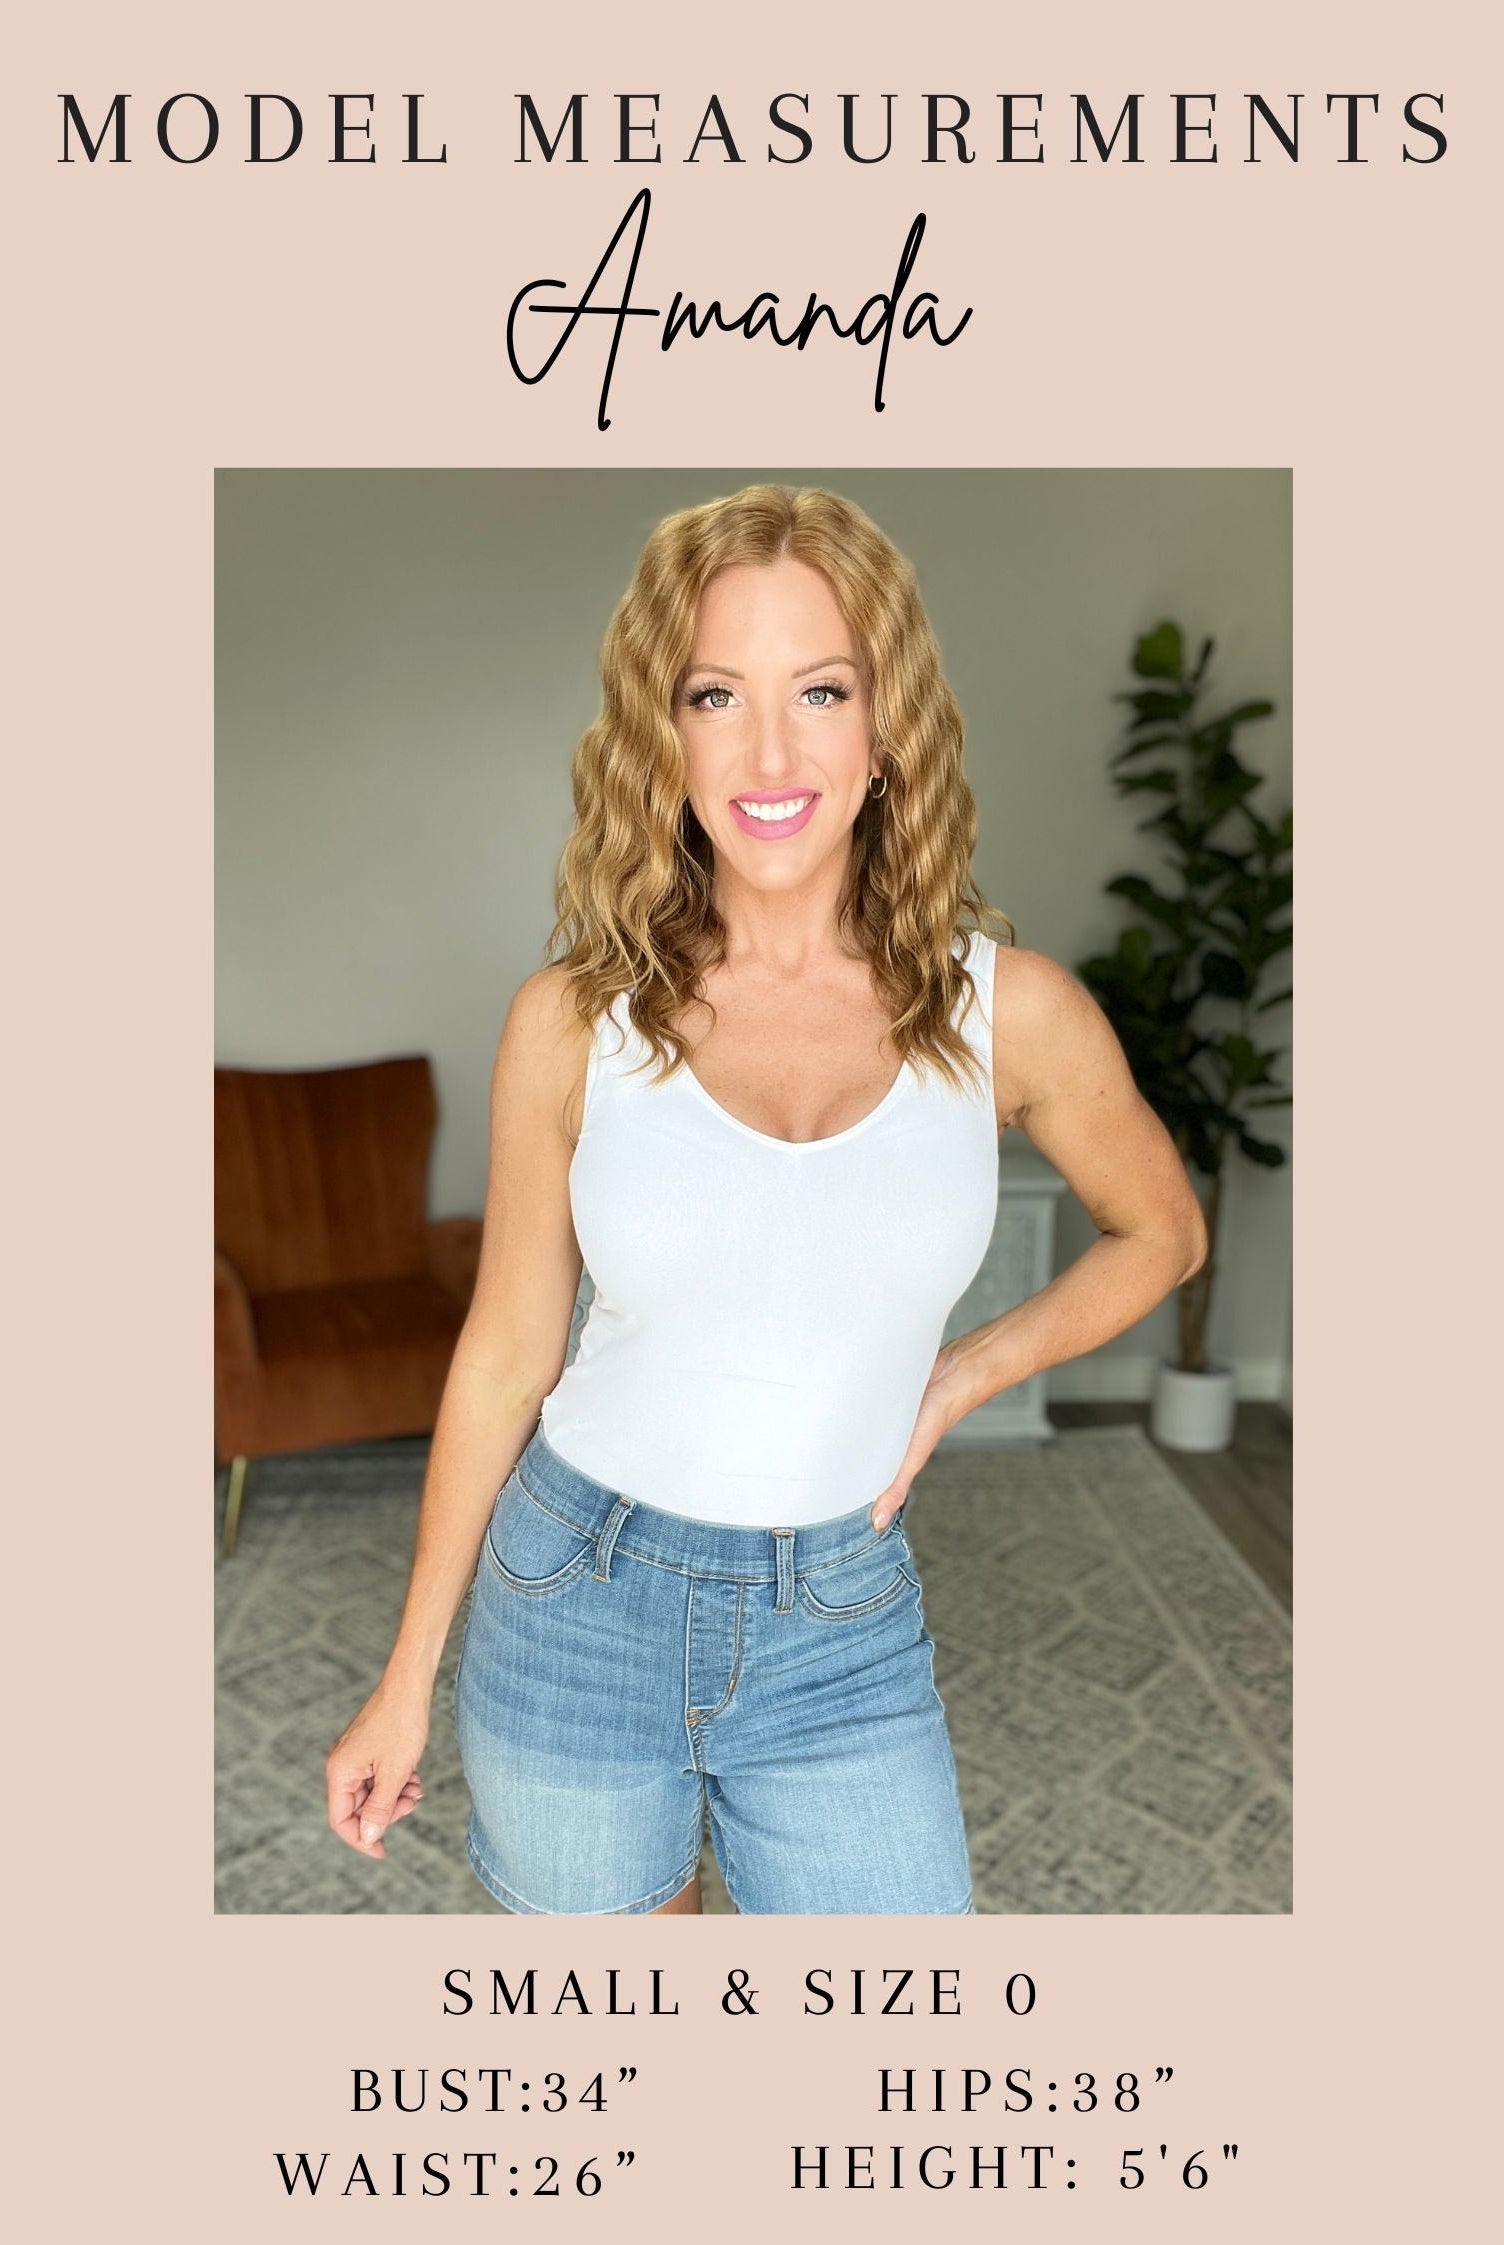 Airflow Babydoll Top in Persimmon-Short Sleeve Tops-Krush Kandy, Women's Online Fashion Boutique Located in Phoenix, Arizona (Scottsdale Area)